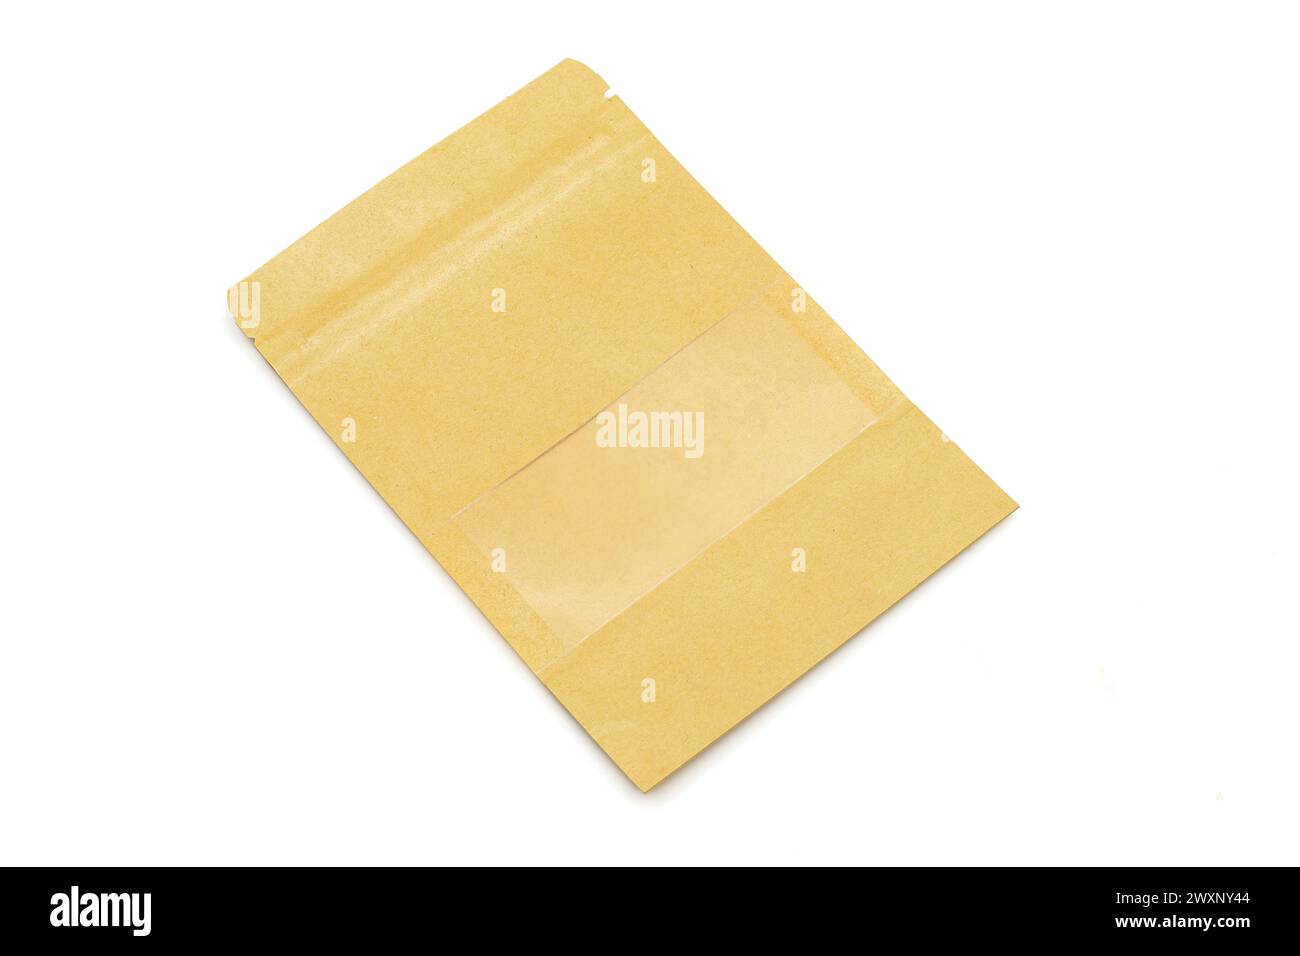 Small empty brown doypack zip paper bag isolated on white background Stock Photo